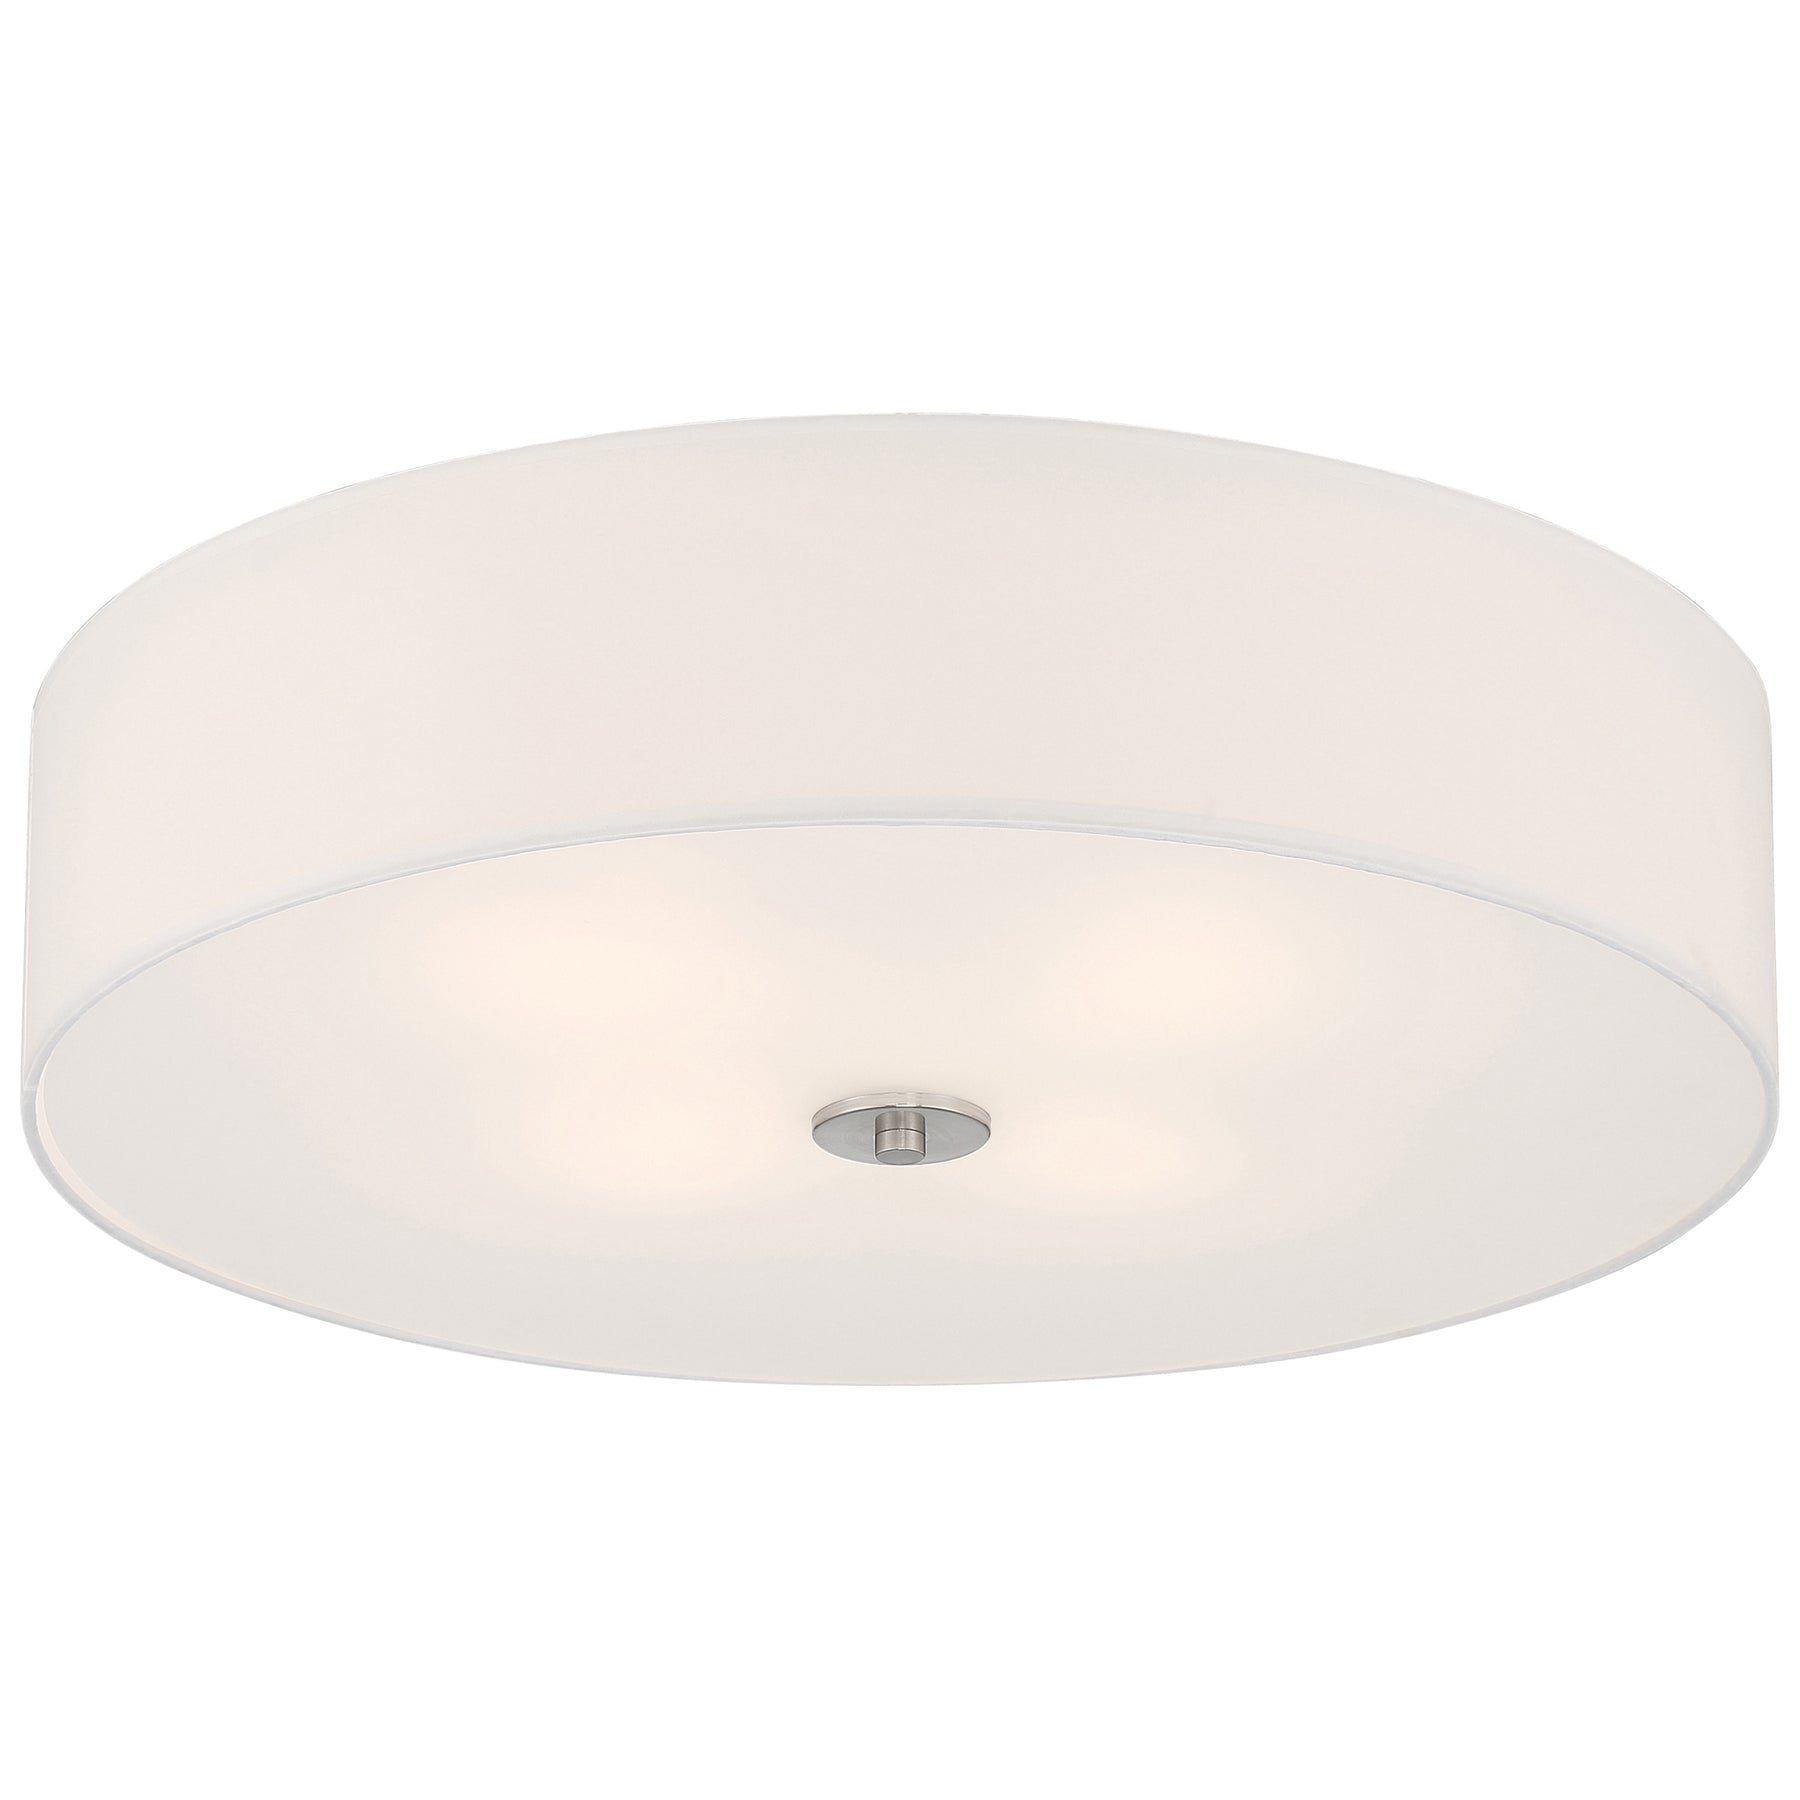 Mid Town 4 Light 24.00 inch Flush Mount - Brushed Steel